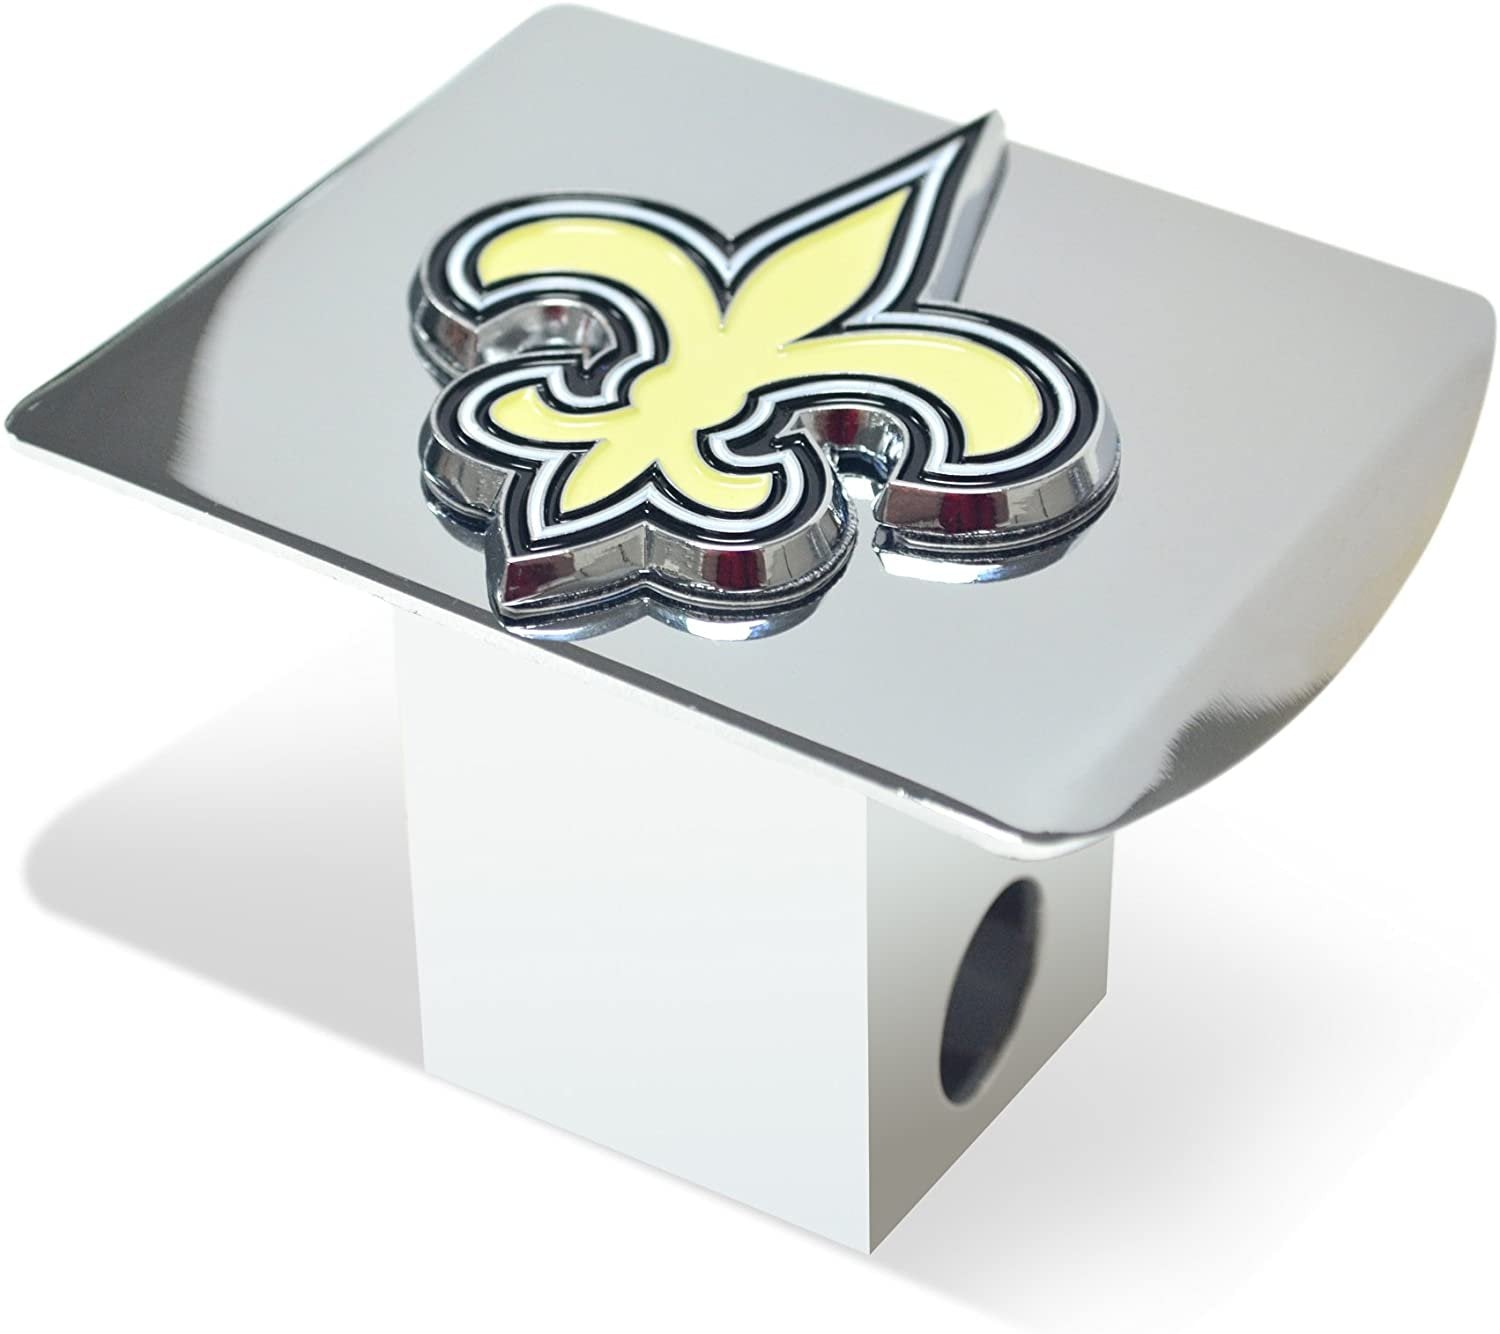 Missouri Tigers Hitch Cover Solid Metal with Color Metal Emblem 2" Square Type III University of